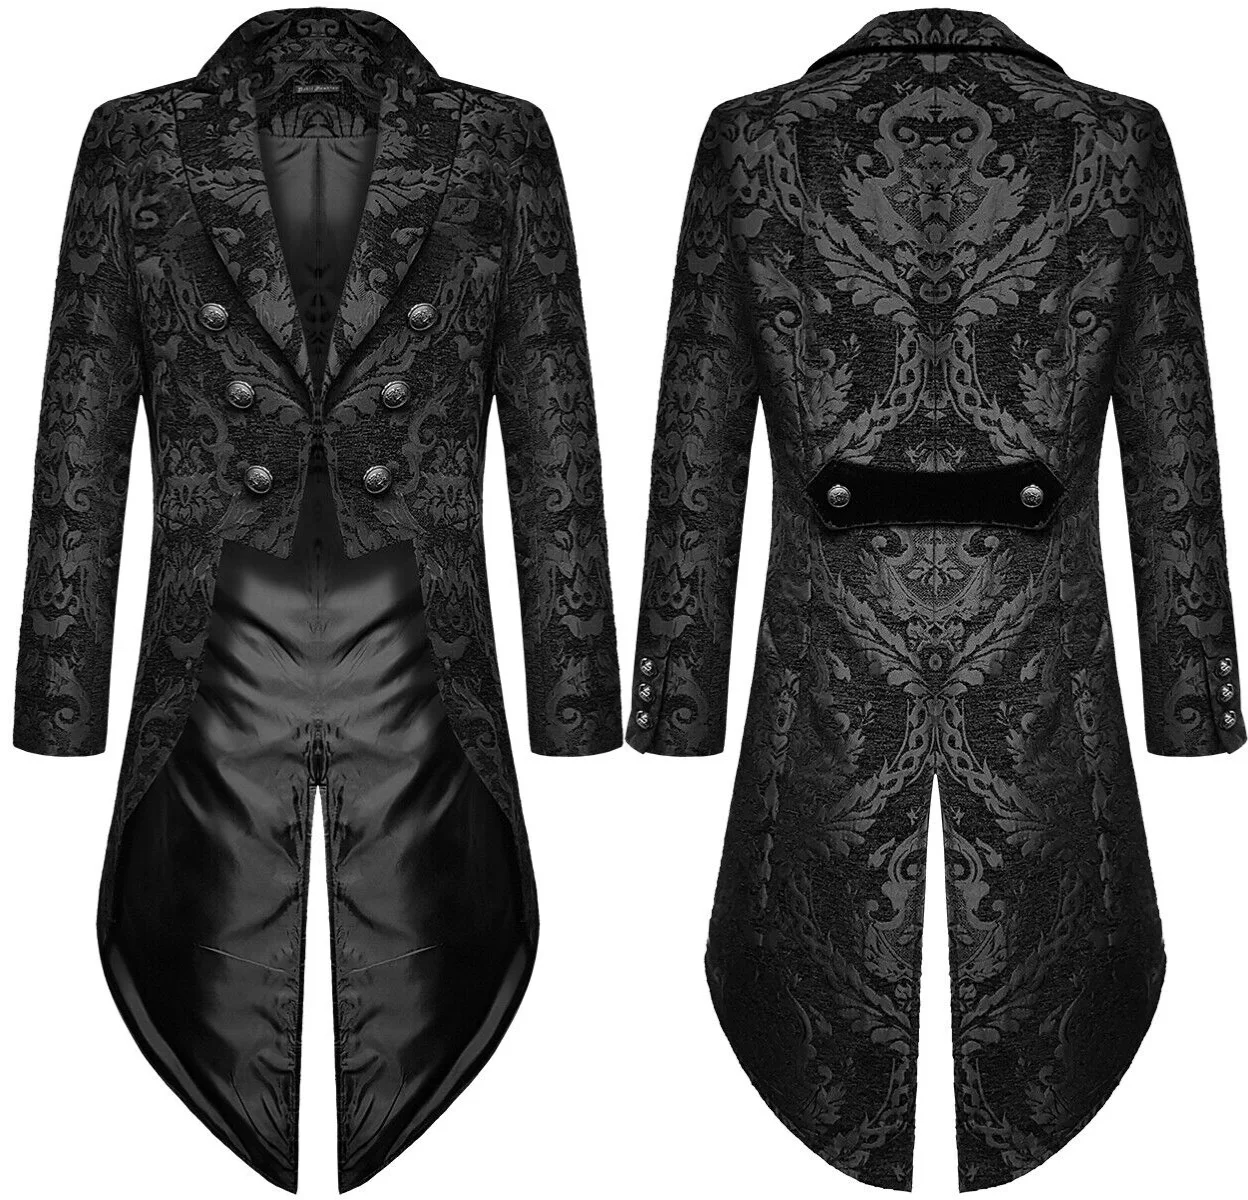 

Mens Gothic Tailcoat Jacket Medieval Black Long Coat Steampunk Tuedo Suit Victorian Noble Prince Party Cosplay Costumes